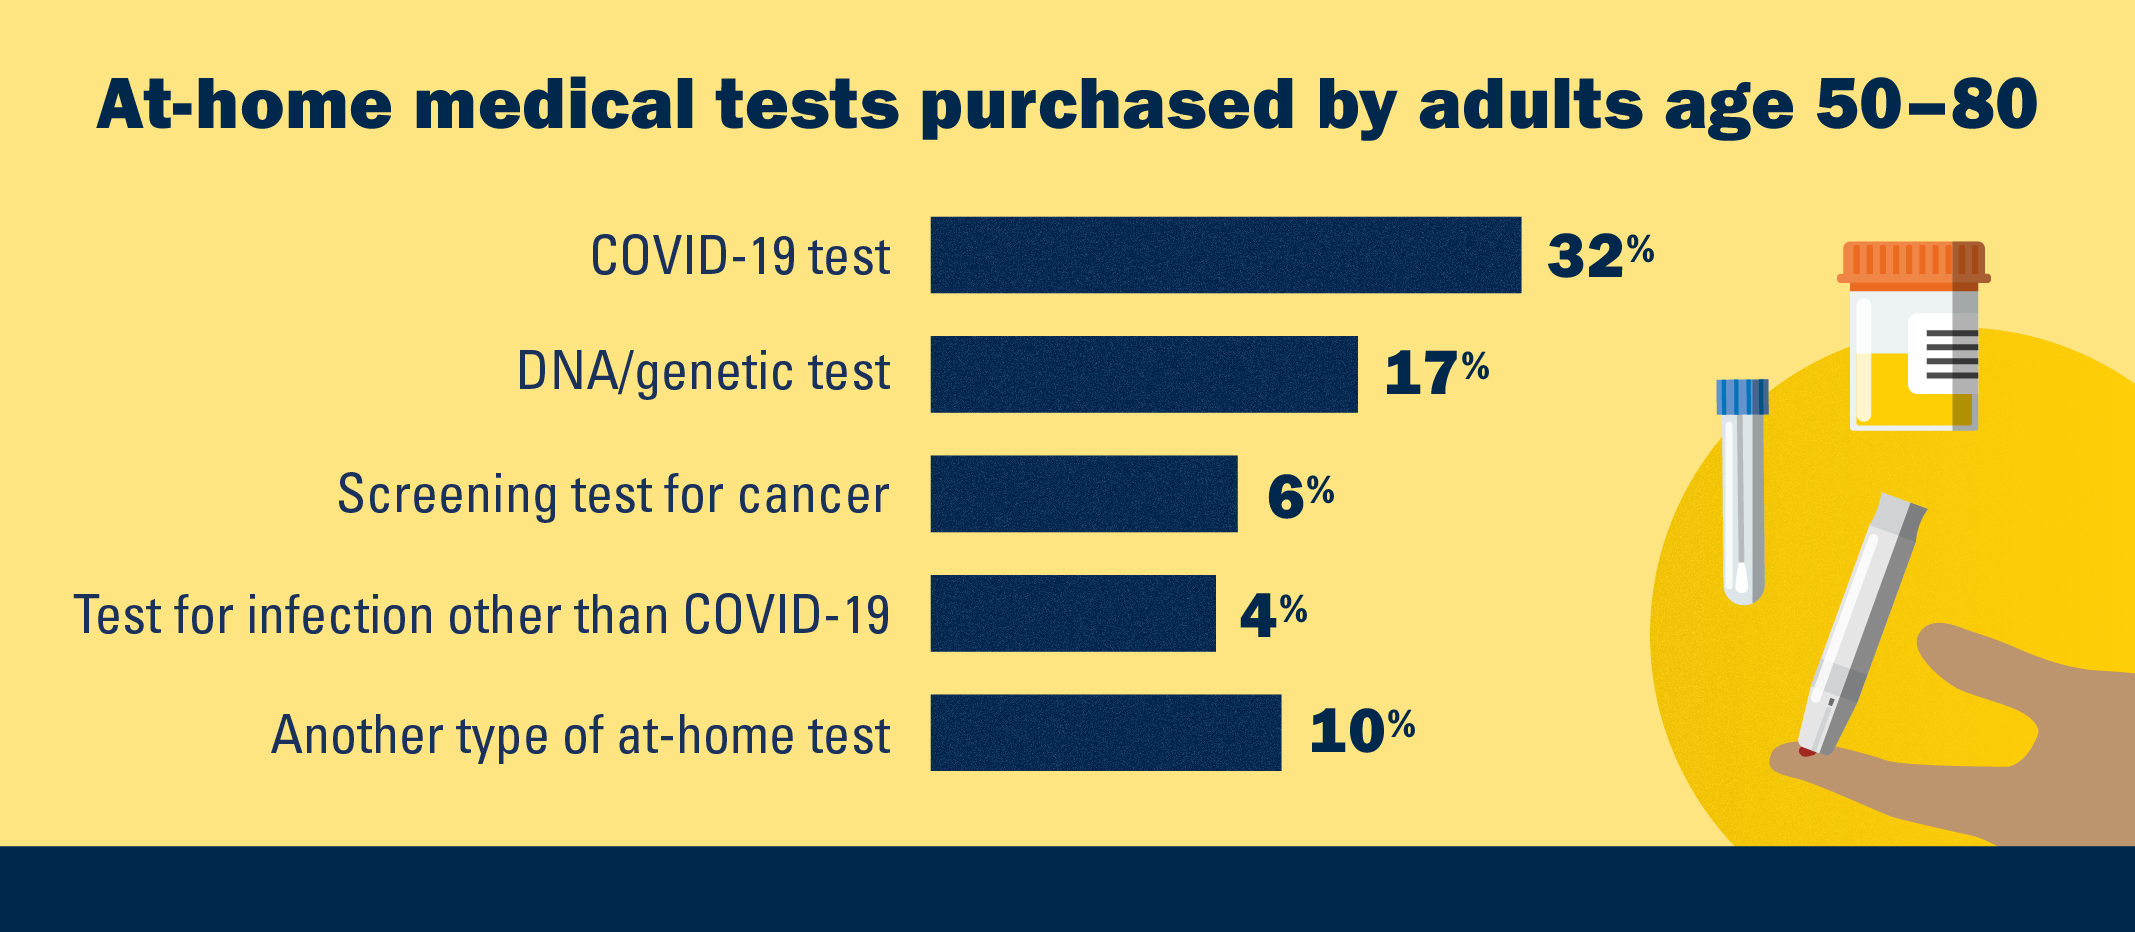 At-home medical tests purchased by adults  age 50-80; COVID-19 test (32%), DNA/genetic test (17%), Screening test for cancer (6%)